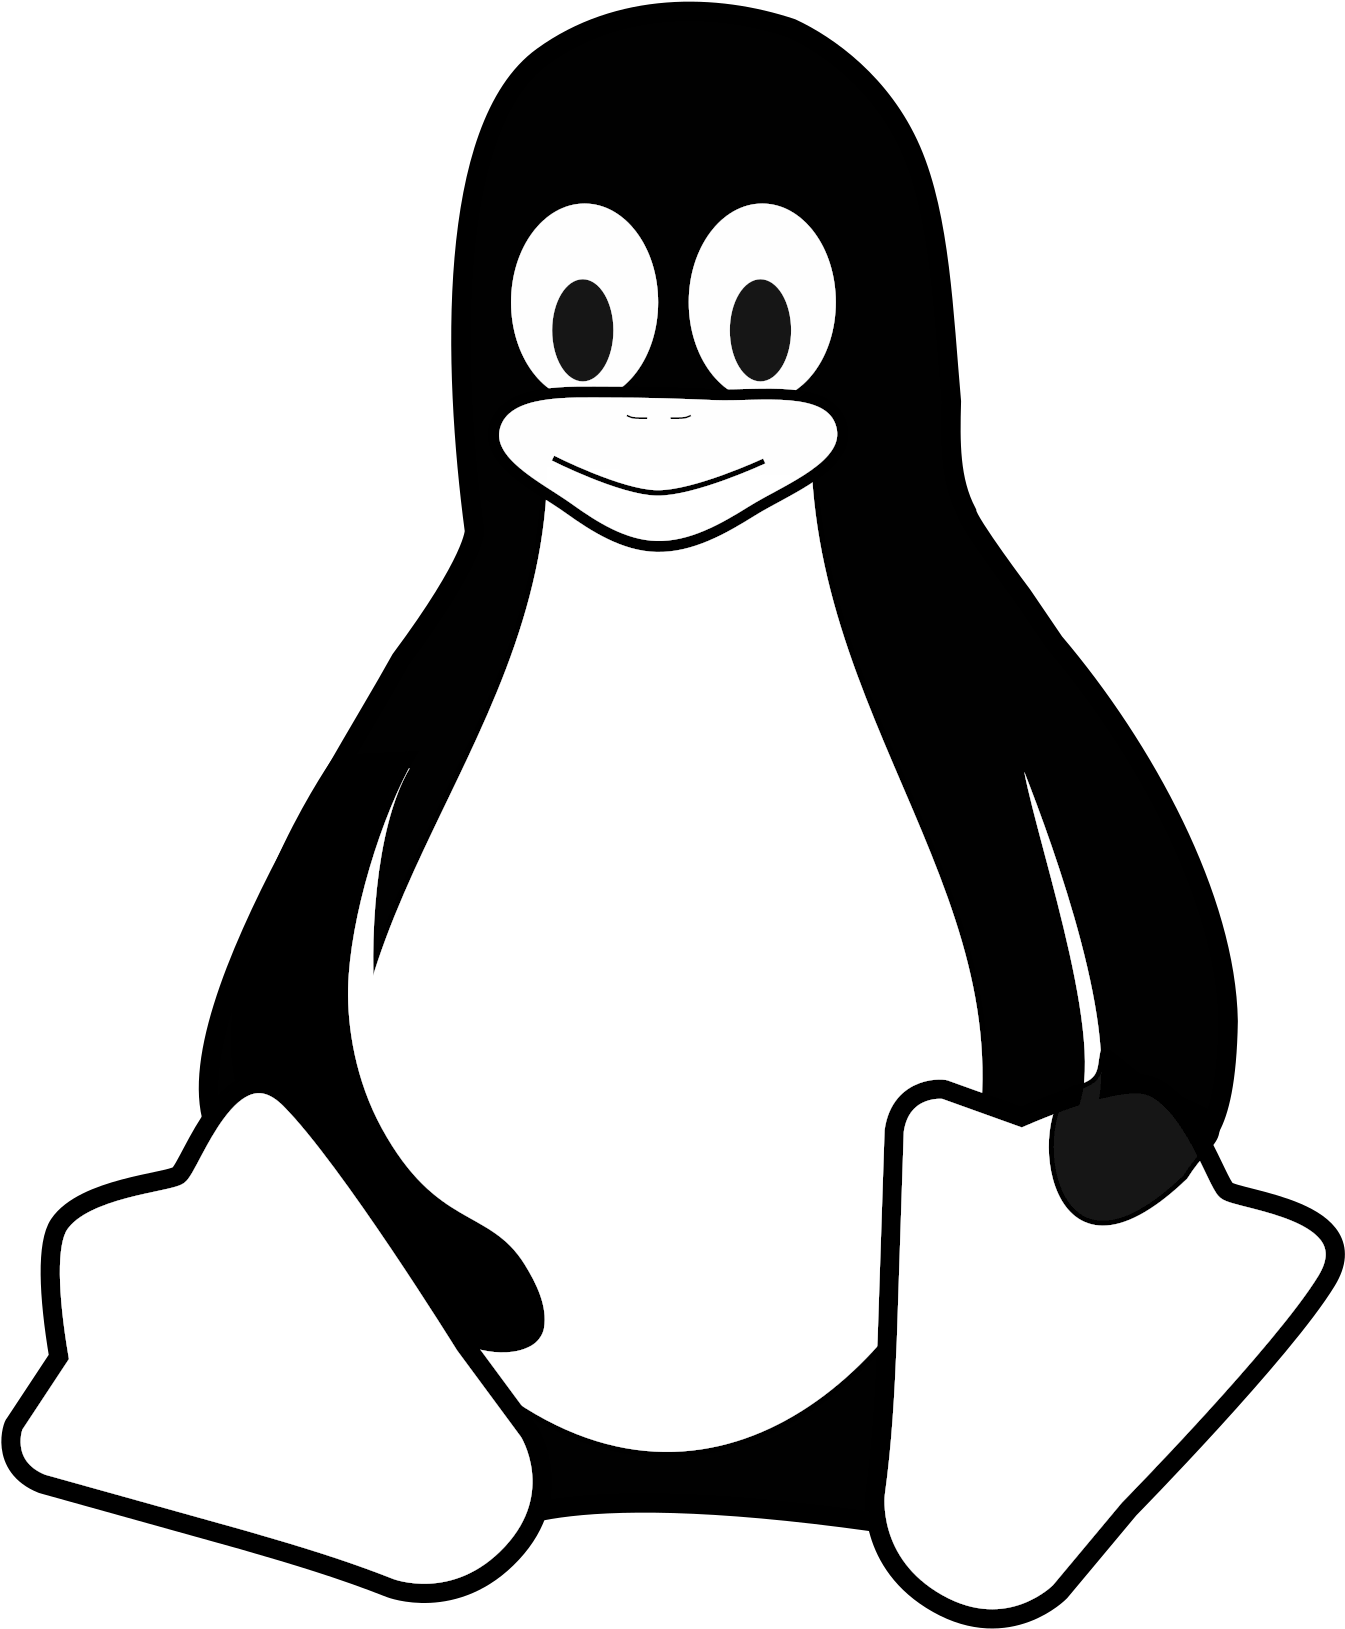 Bmp picture. Значок Linux. Значок Пингвин. Linux Пингвин. Пингвин bmp.